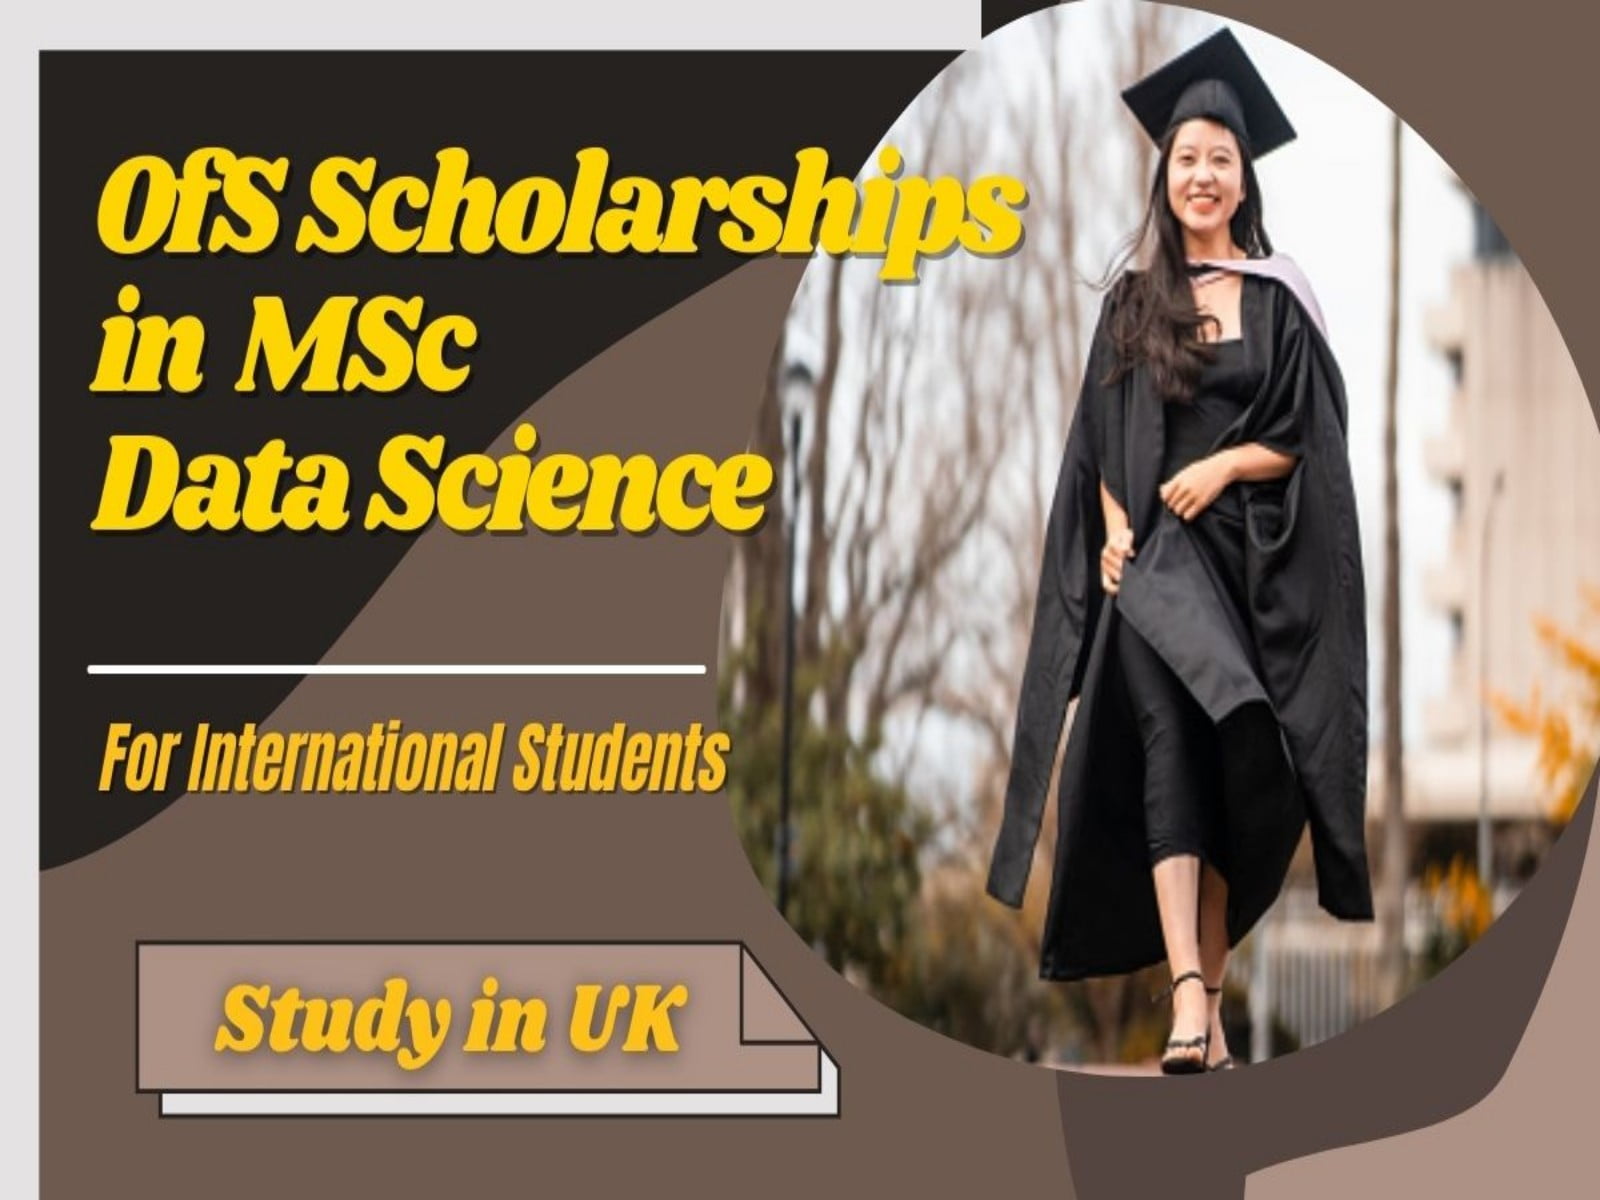 OfS Scholarships for MSc Data Science 2023 at University of the West of England in UK